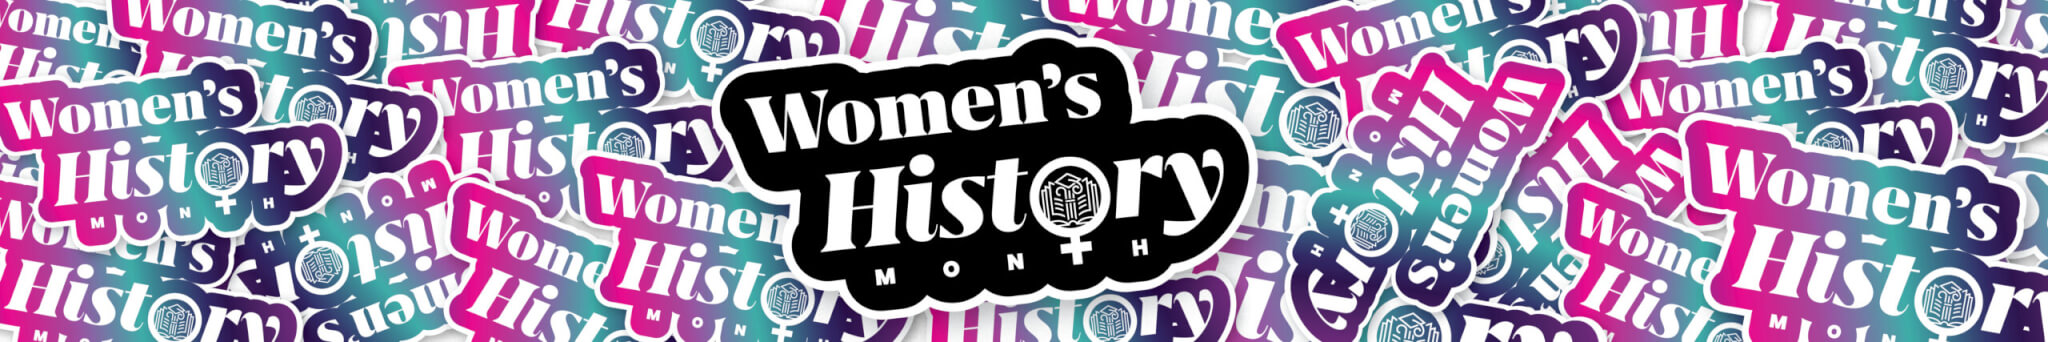 Women's History Month in black and white in center, with colorful versions of the words in a collage pattern around it